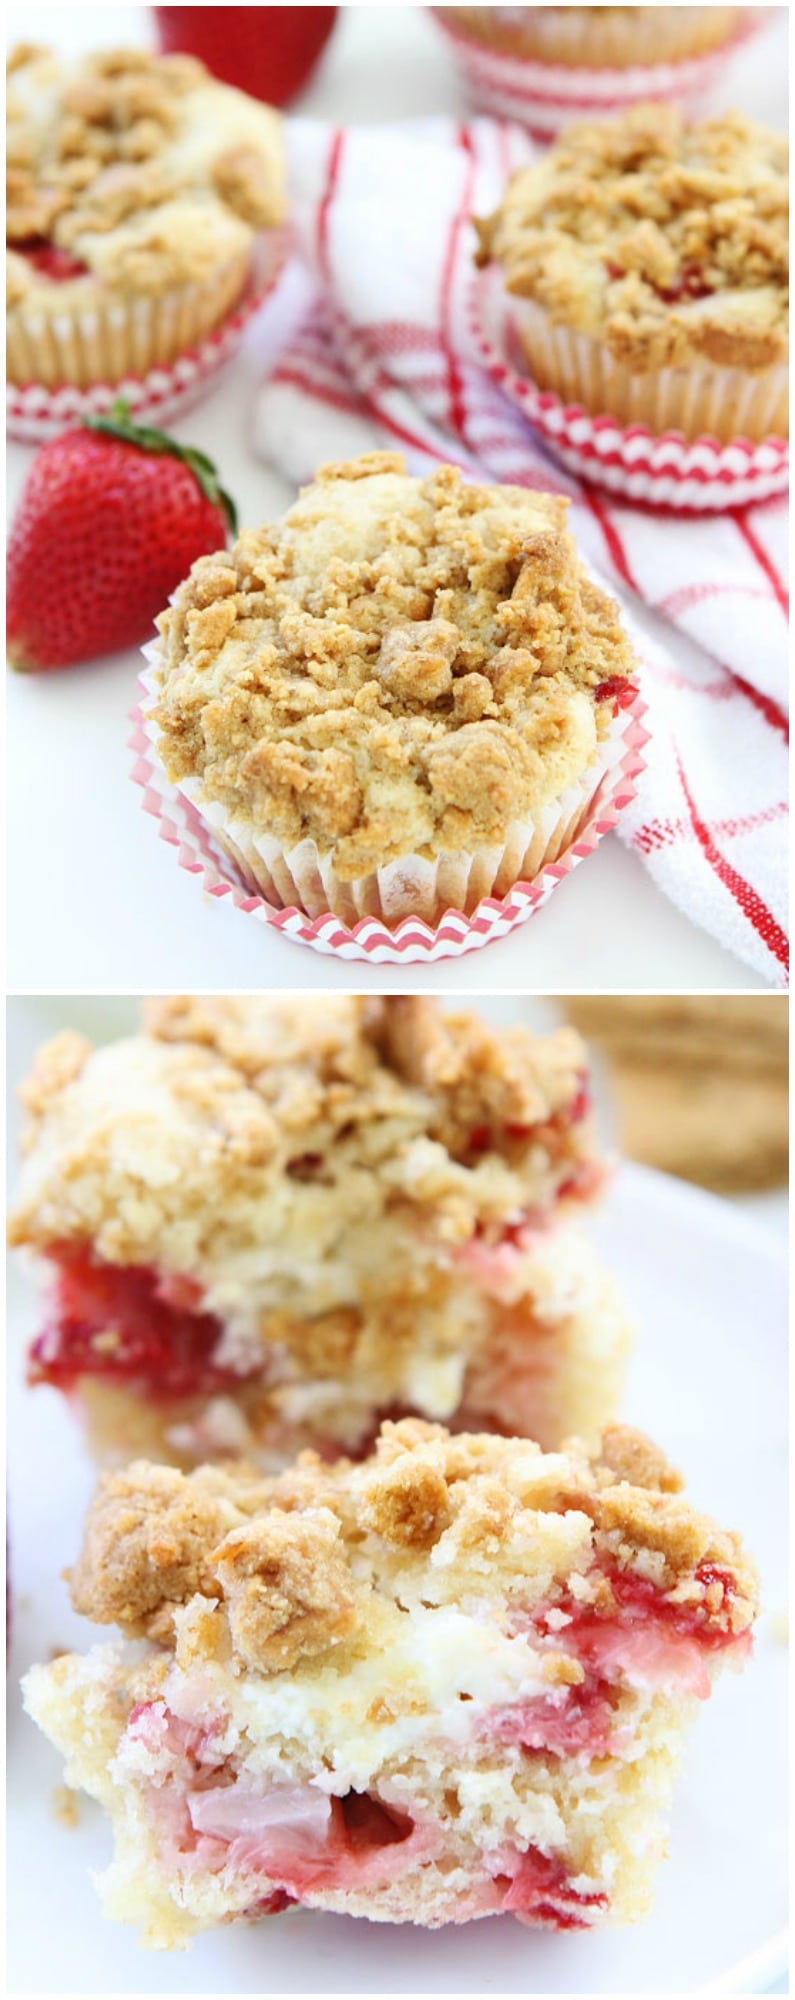 Strawberry Cheesecake Muffin Recipe on twopeasandtheirpod.com There is a special cheesecake surprise inside and a graham cracker streusel on top! These muffins are amazing!